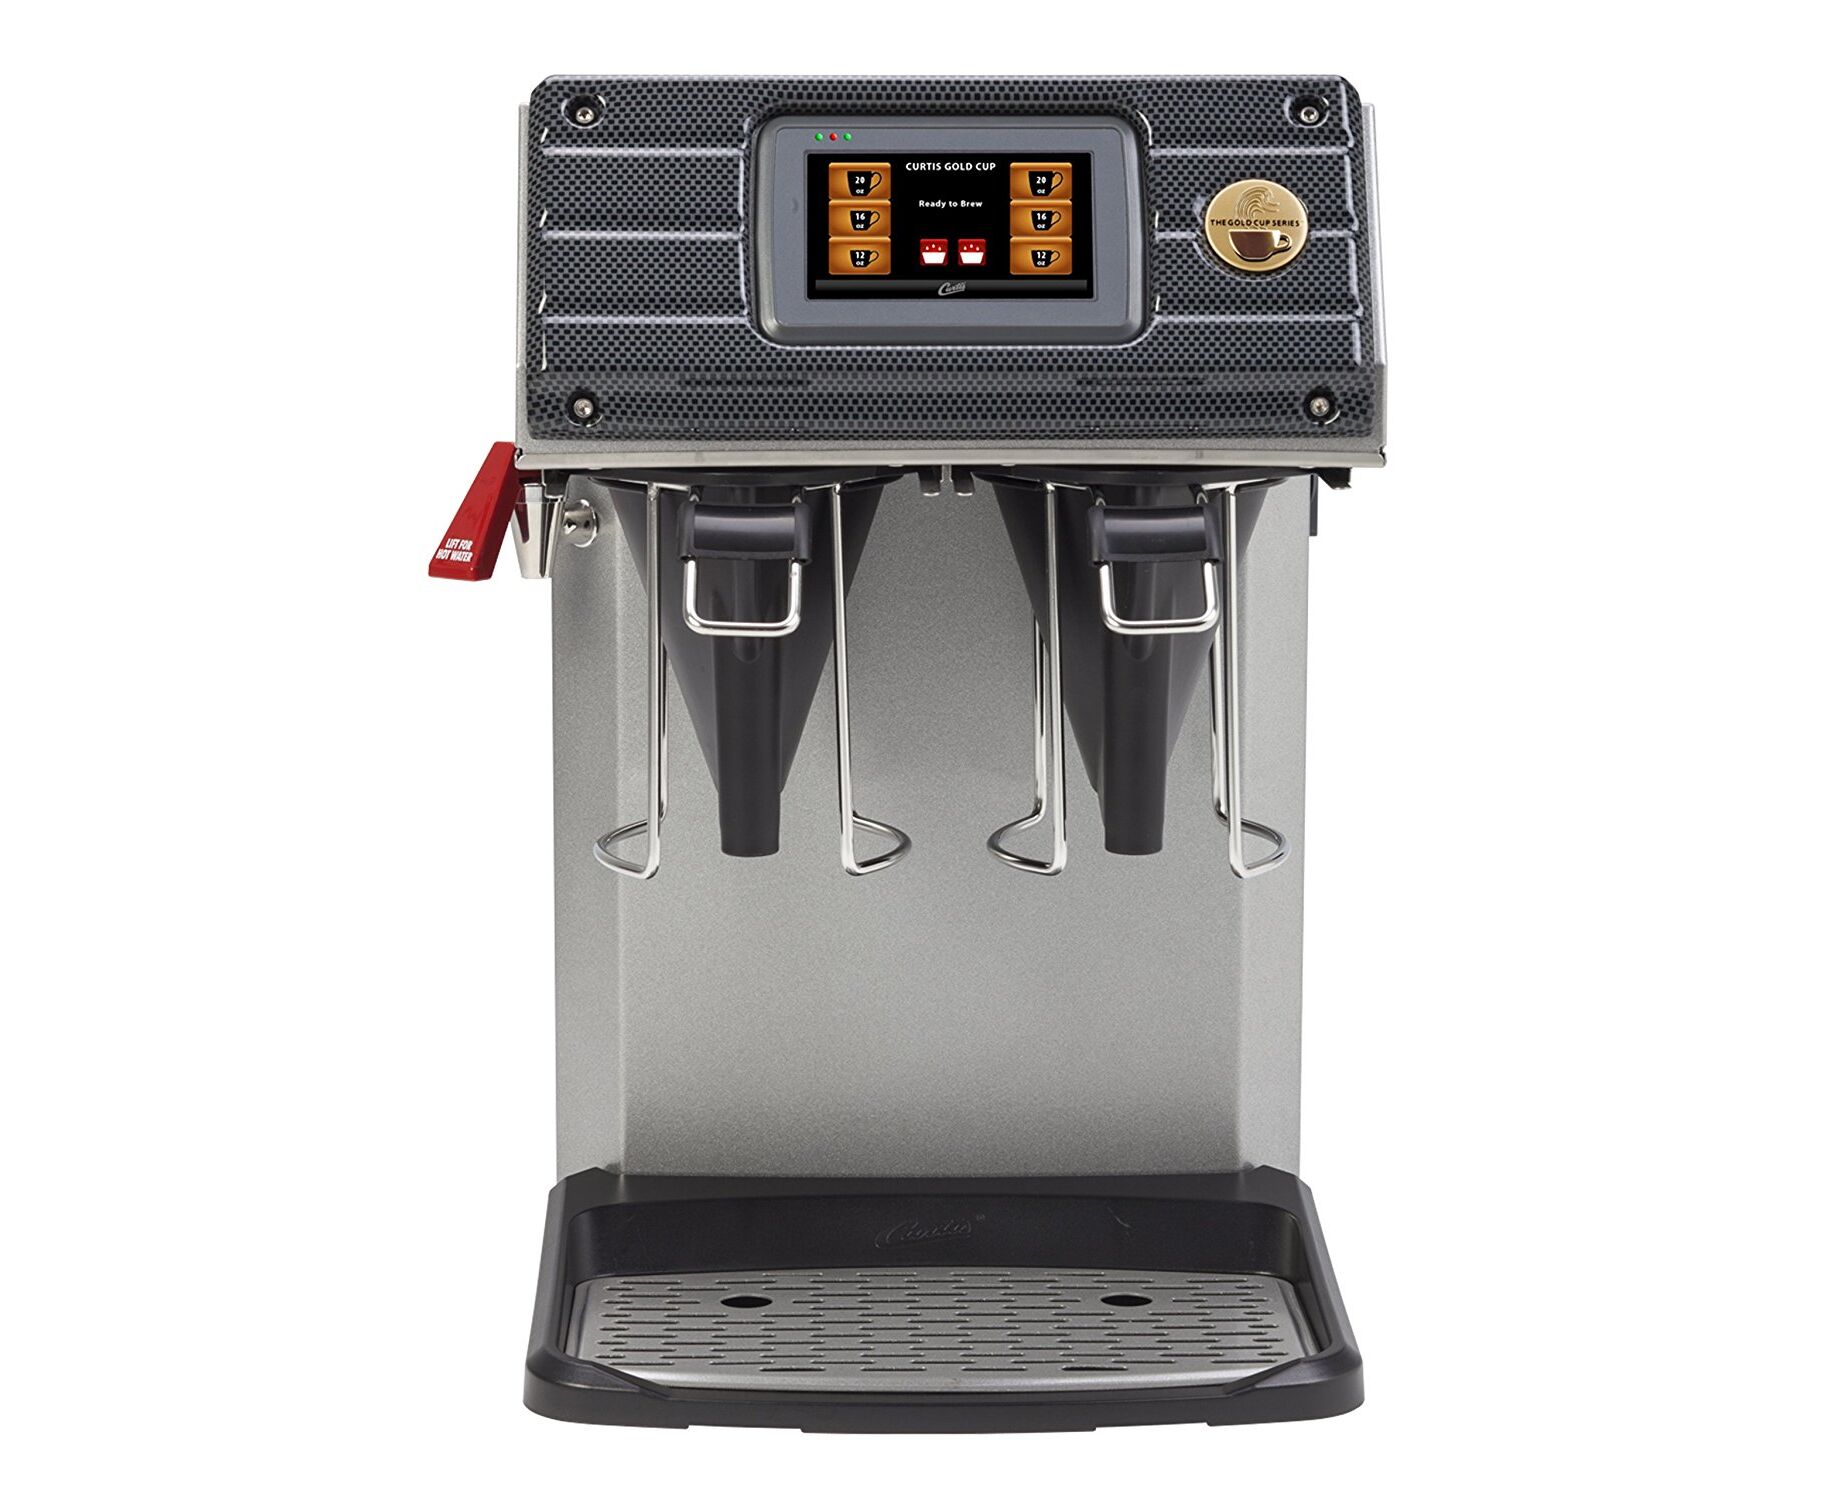 Curtis g4 cgc single cup brewer